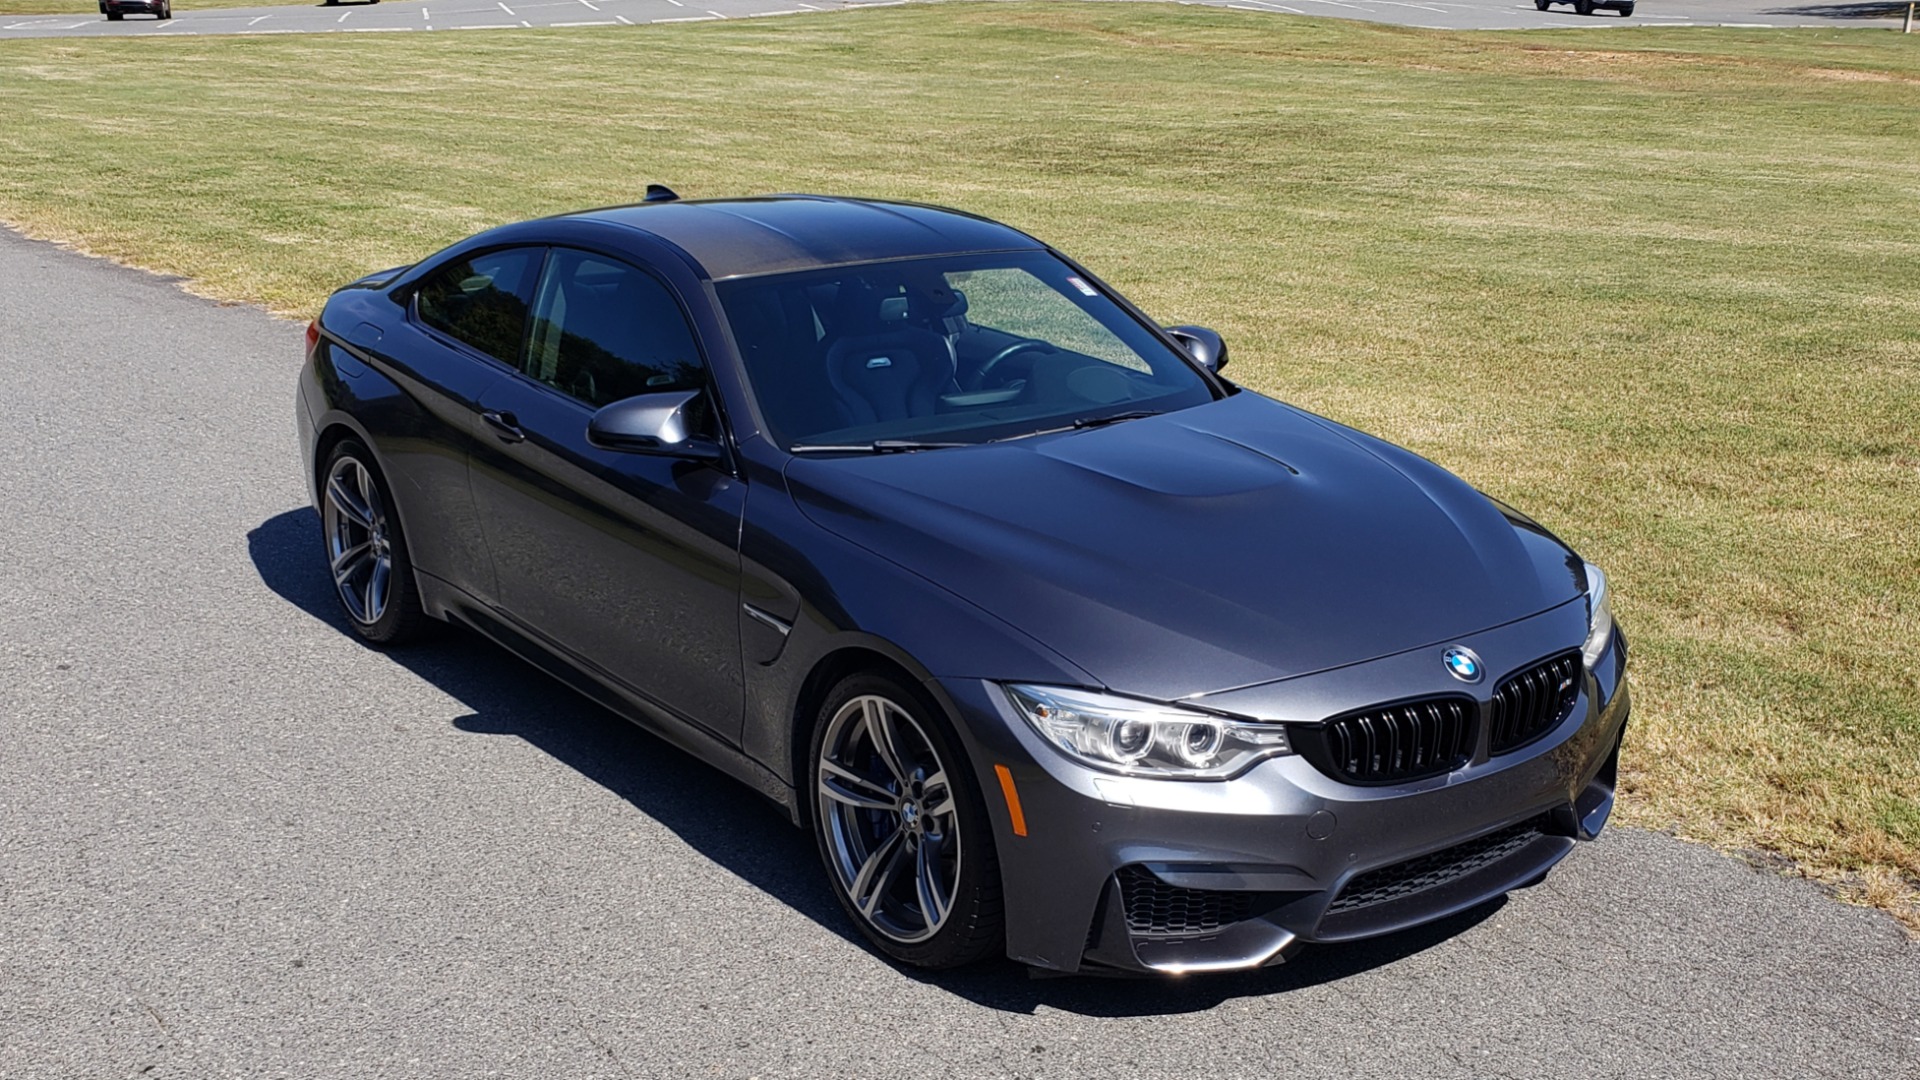 Used 2015 BMW M4 COUPE / EXEC PKG / ADAPT M SUSP / CF ROOF / NAV / REARVIEW for sale Sold at Formula Imports in Charlotte NC 28227 14